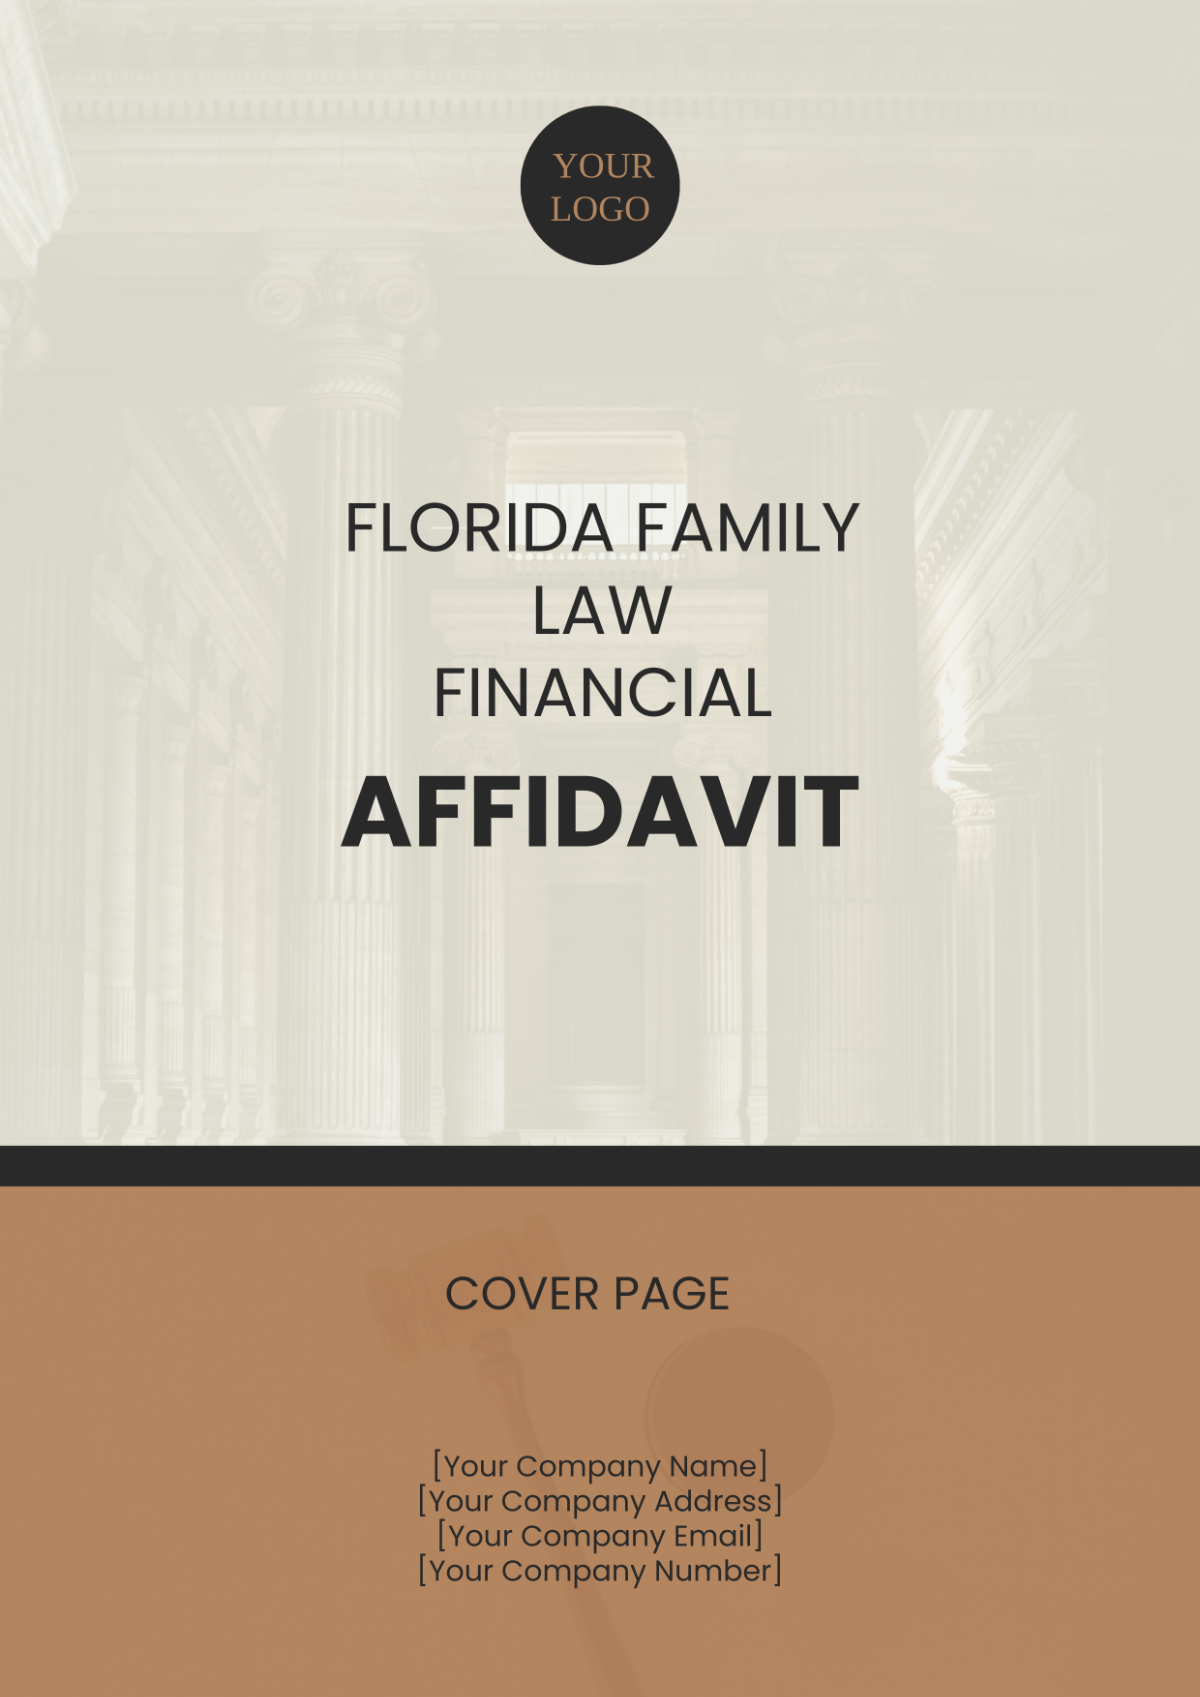 Florida Family Law Financial Affidavit Cover Page